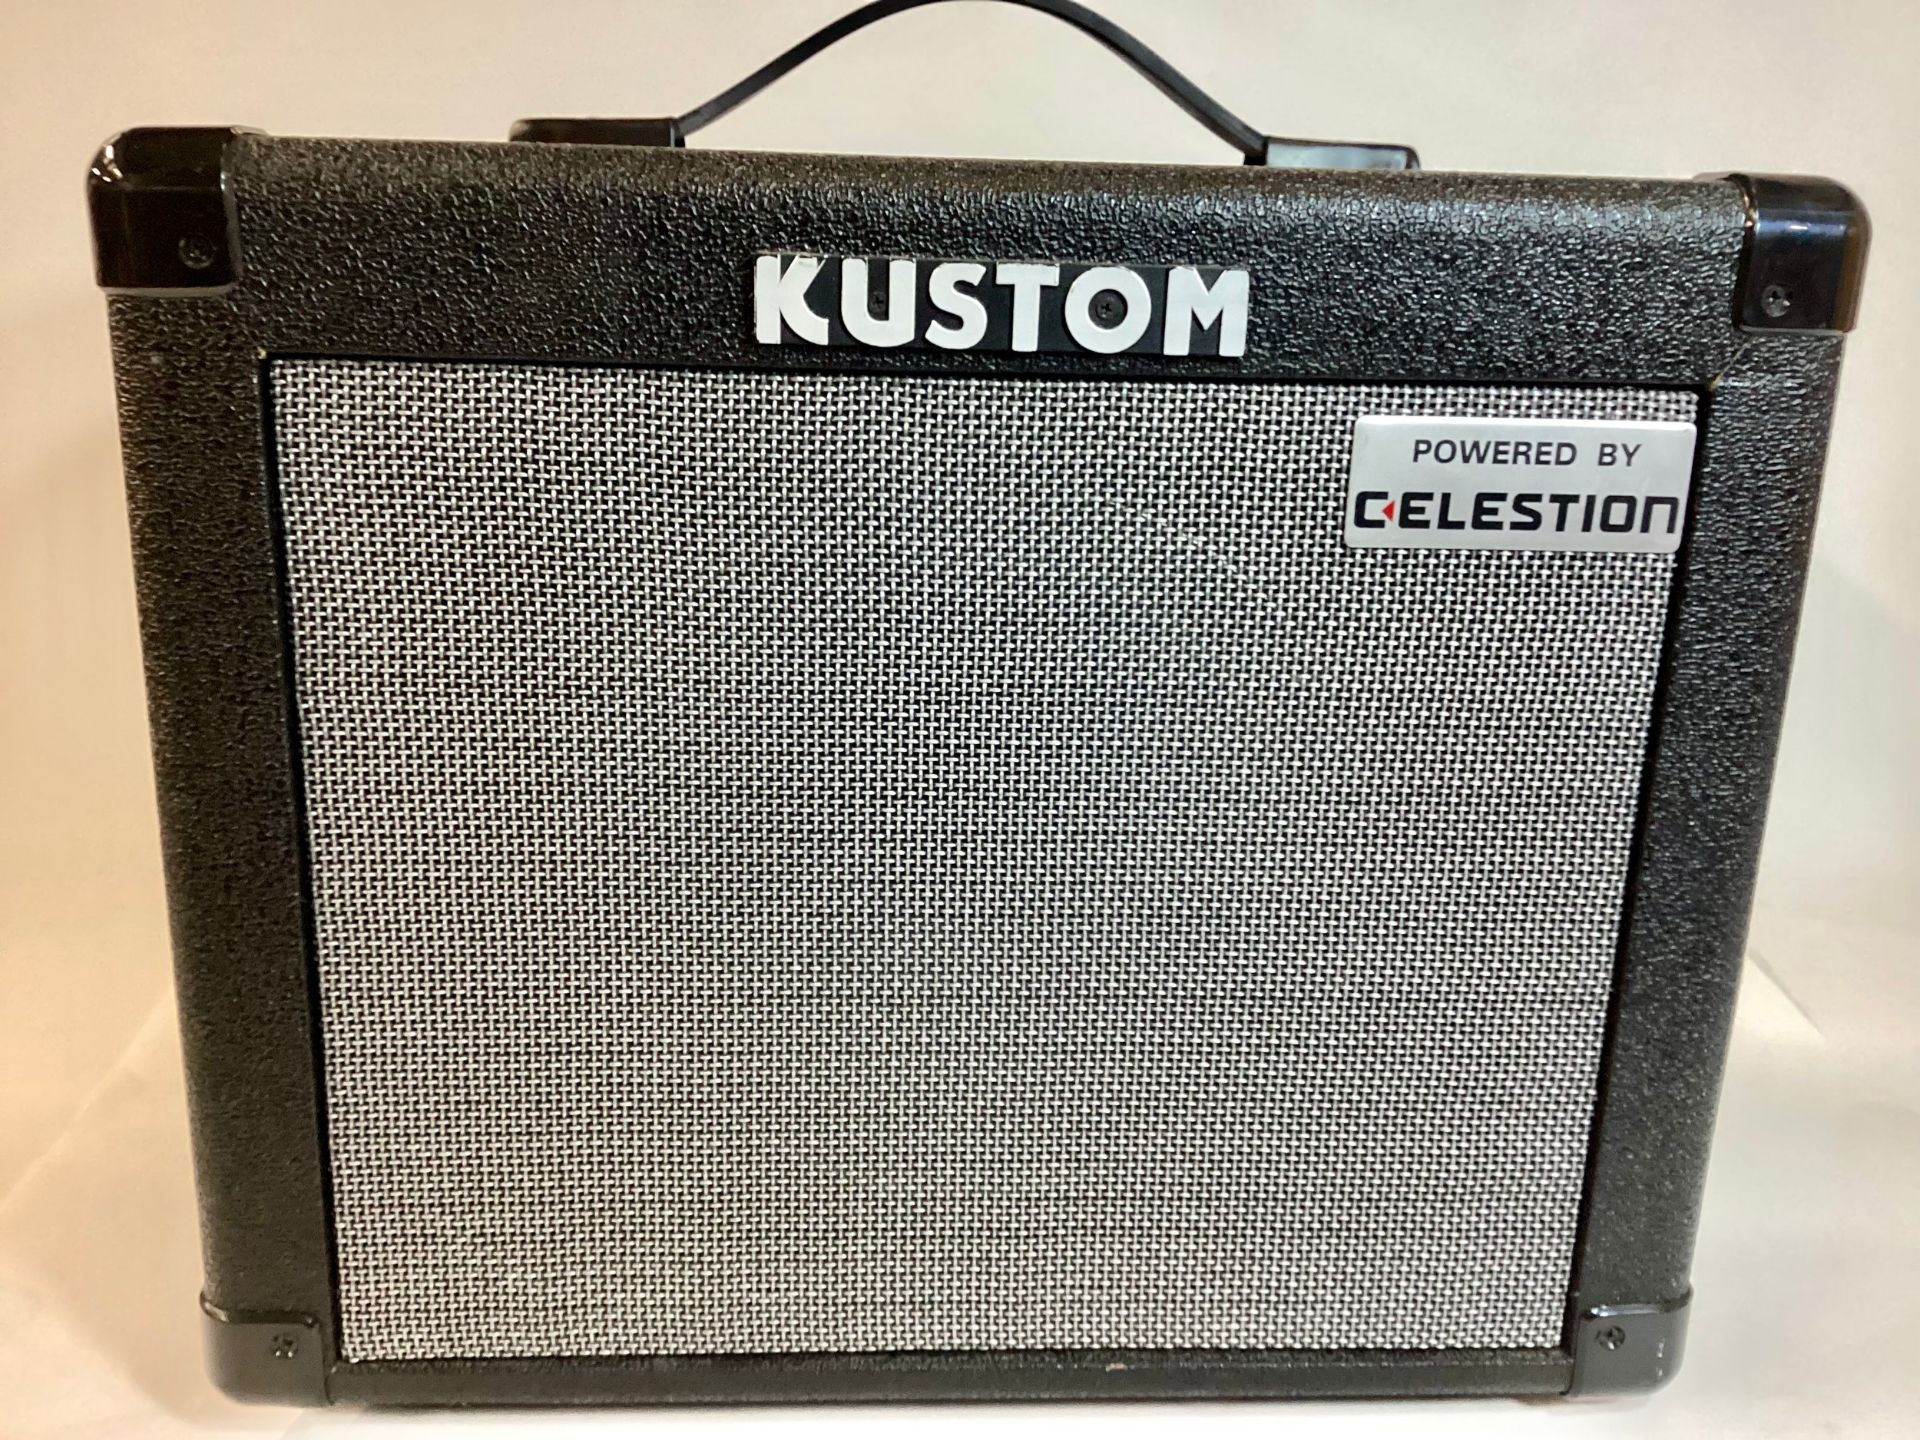 KUSTOM GUITAR AMPLIFIER. This unit powers up fine and is in Ex condition. The model number is KMA-